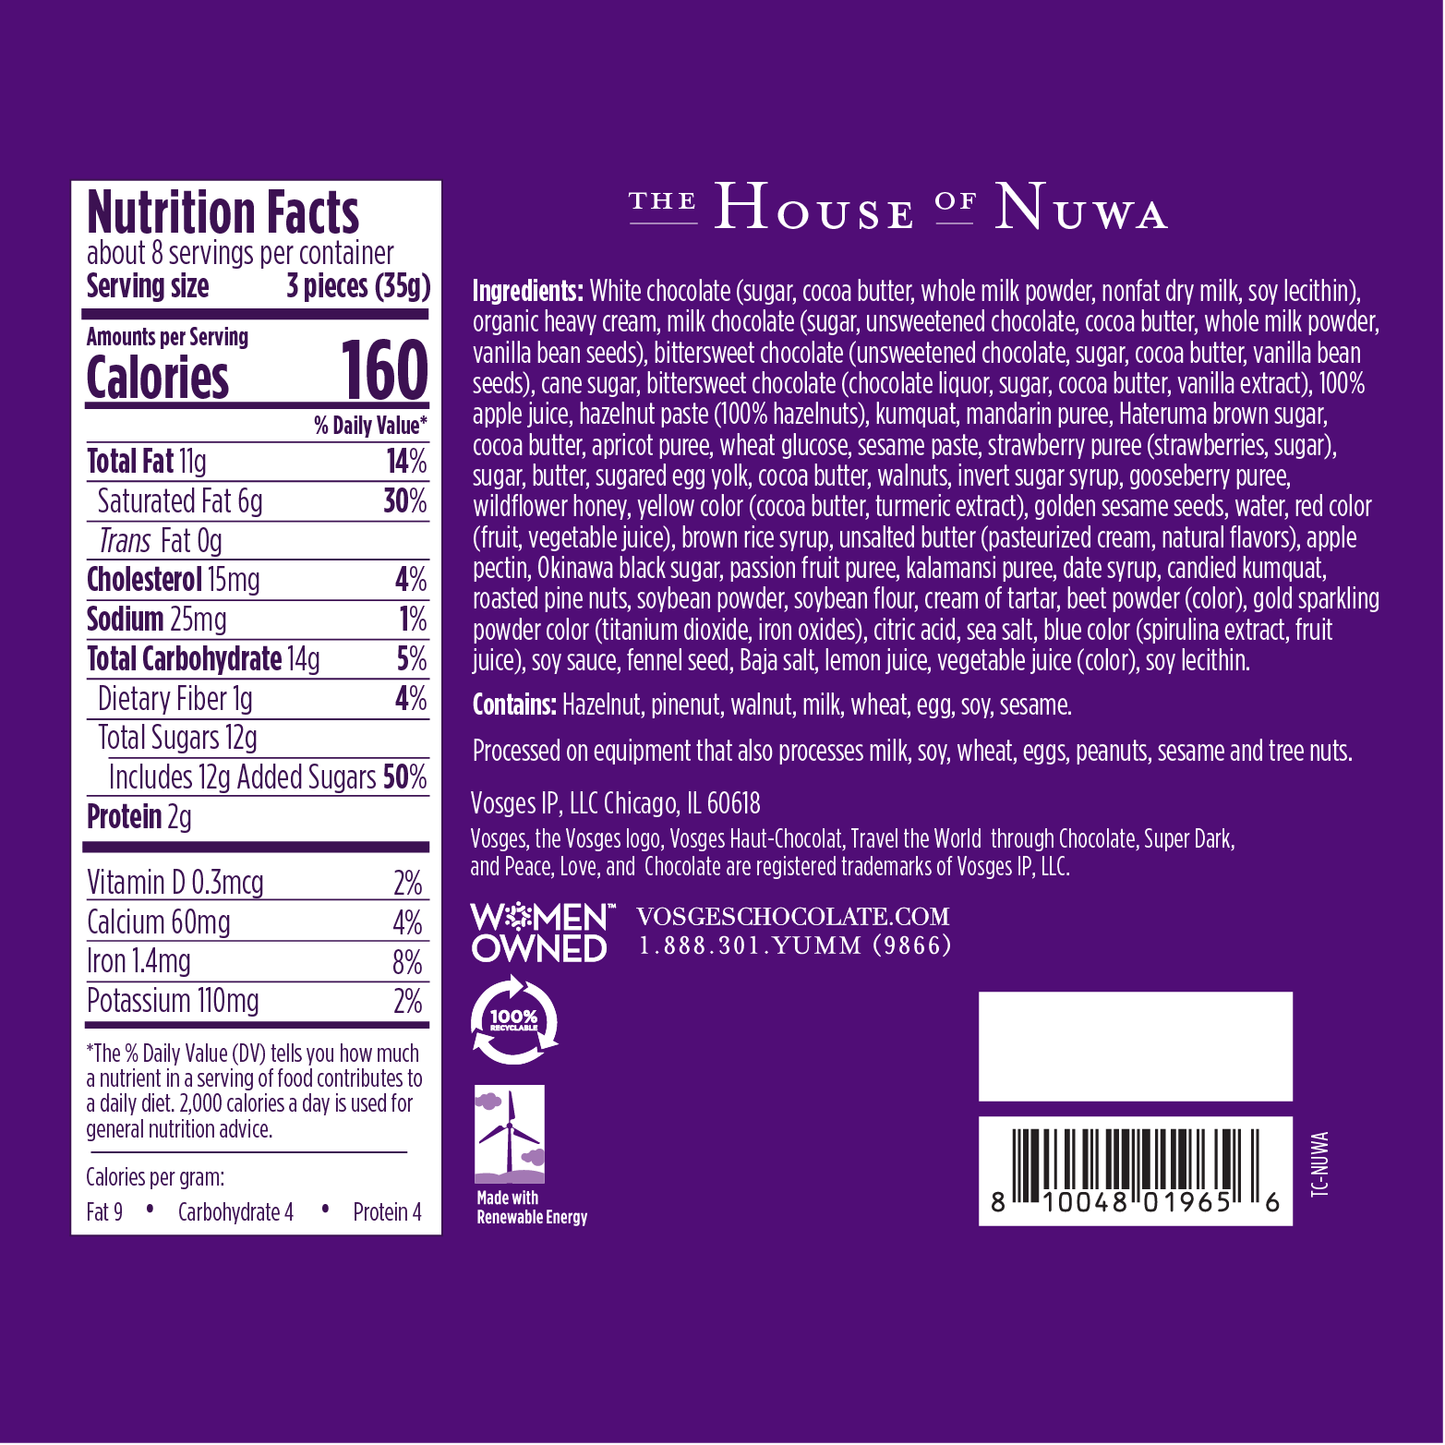 Nutrition Facts and Ingredients of Vosges Haut-Chocolat House of Nuwa Collection written in white san-serif font on a purple background.